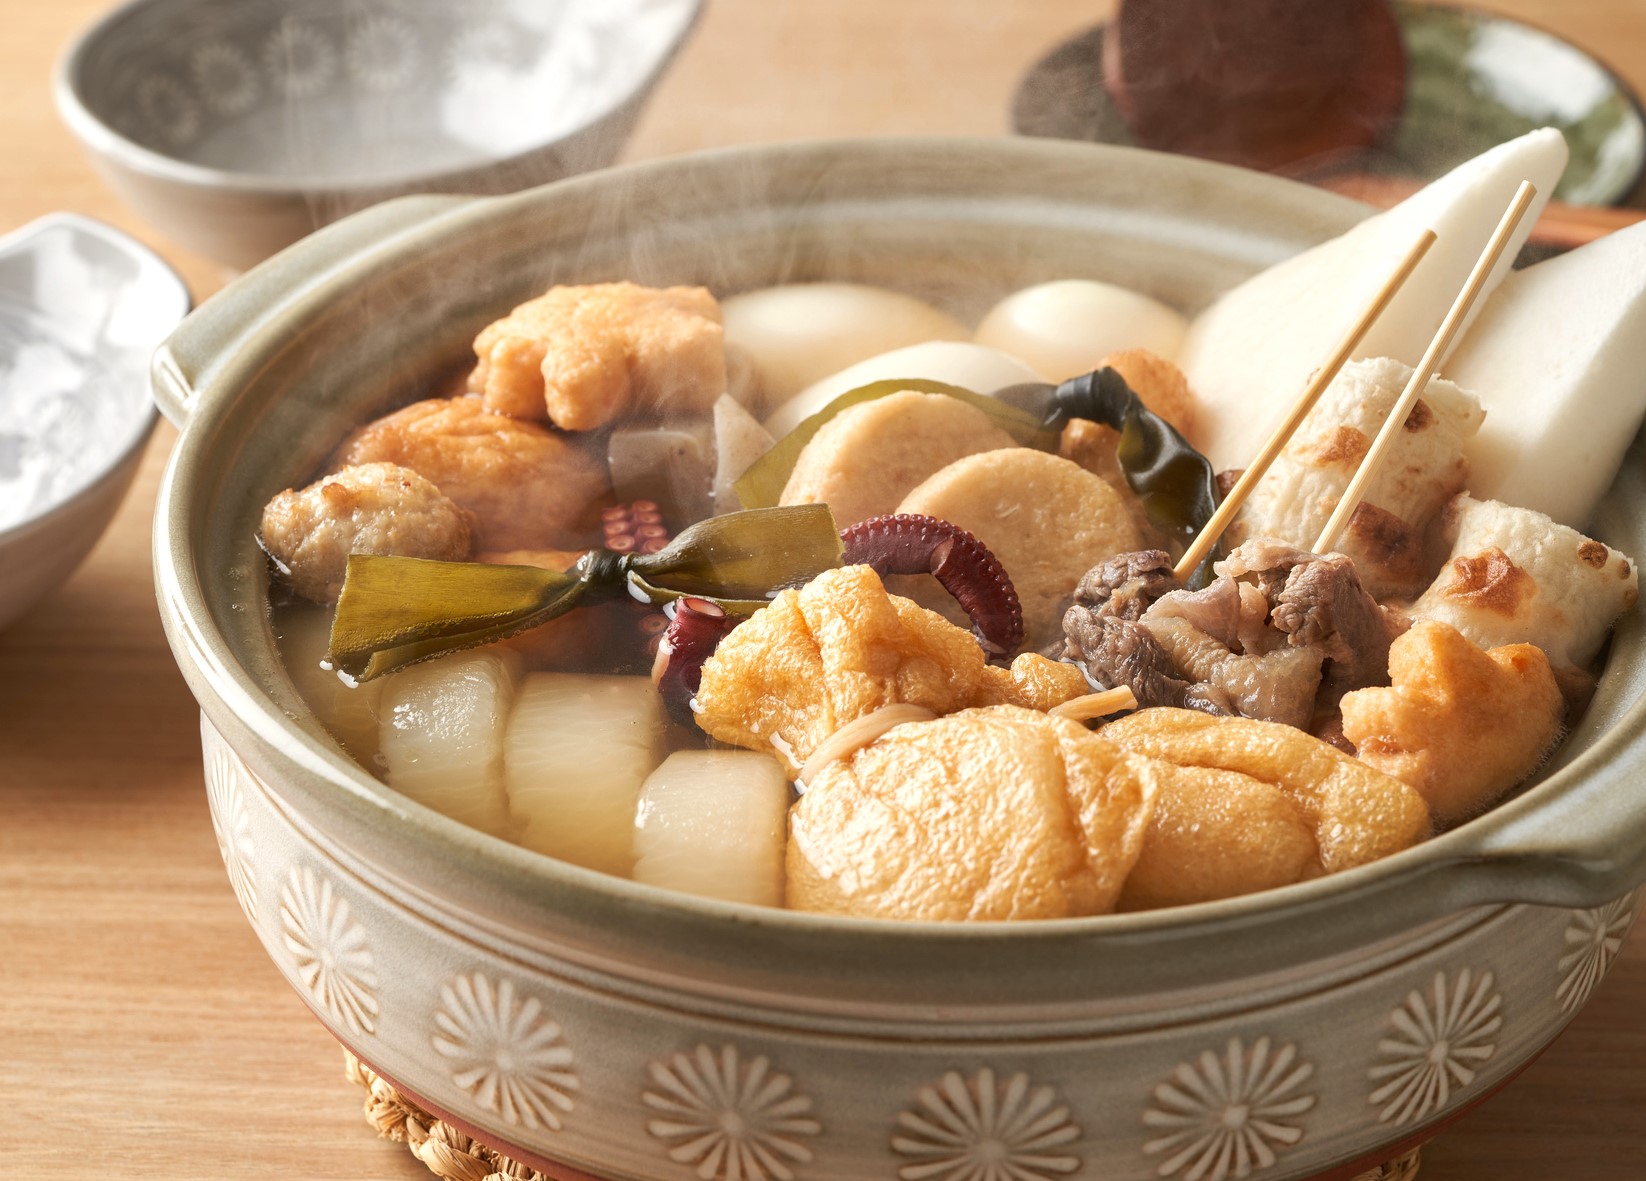 049. Kinds of “Oden” and How to Buy It